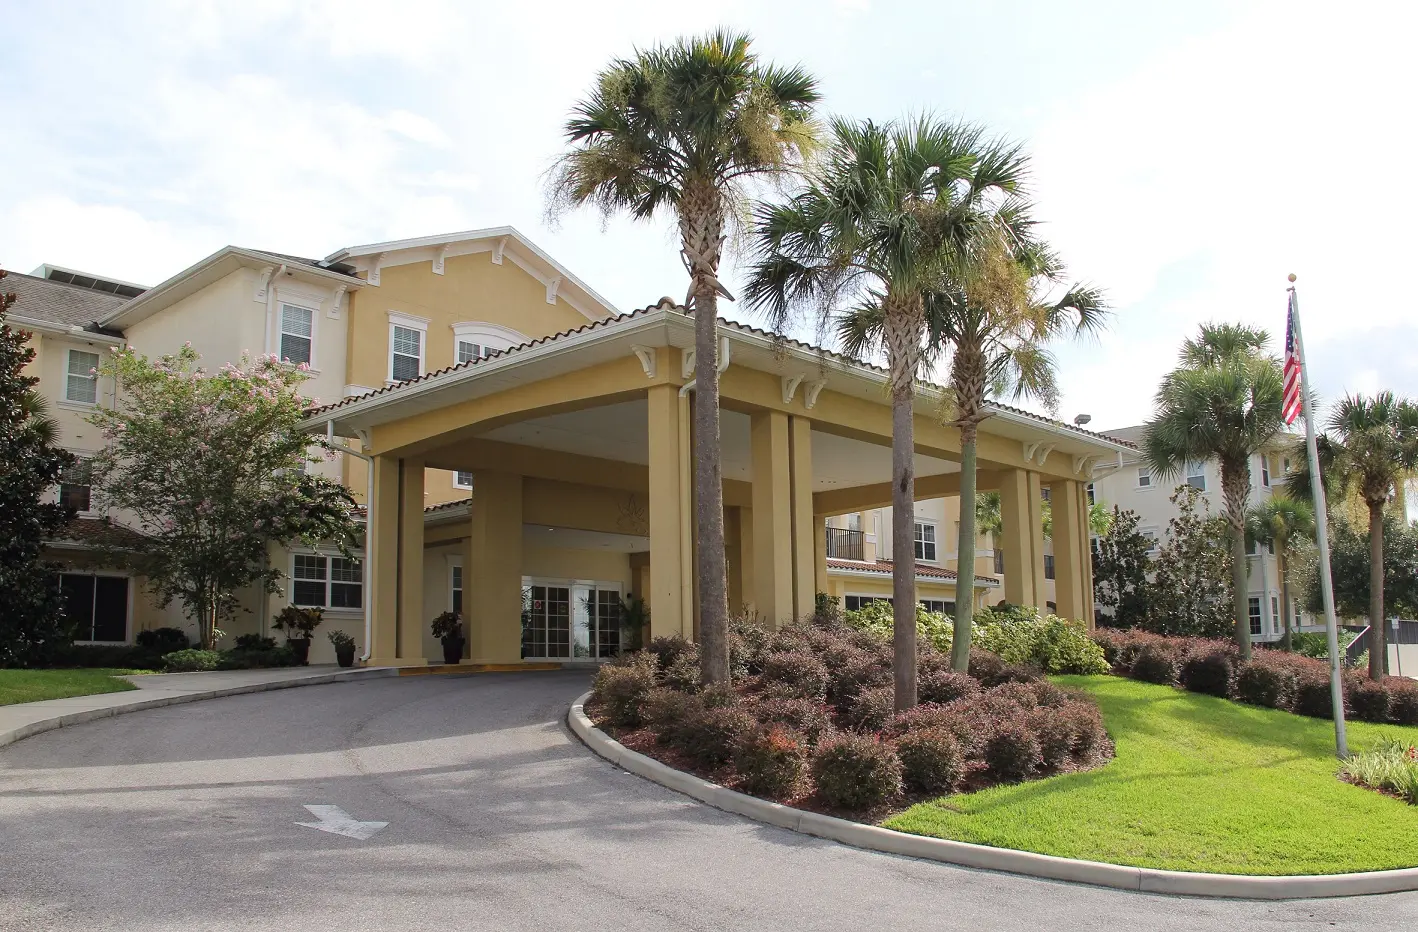 Exterior entry way in the American House Senior Living Community in Zephyrhills, FL